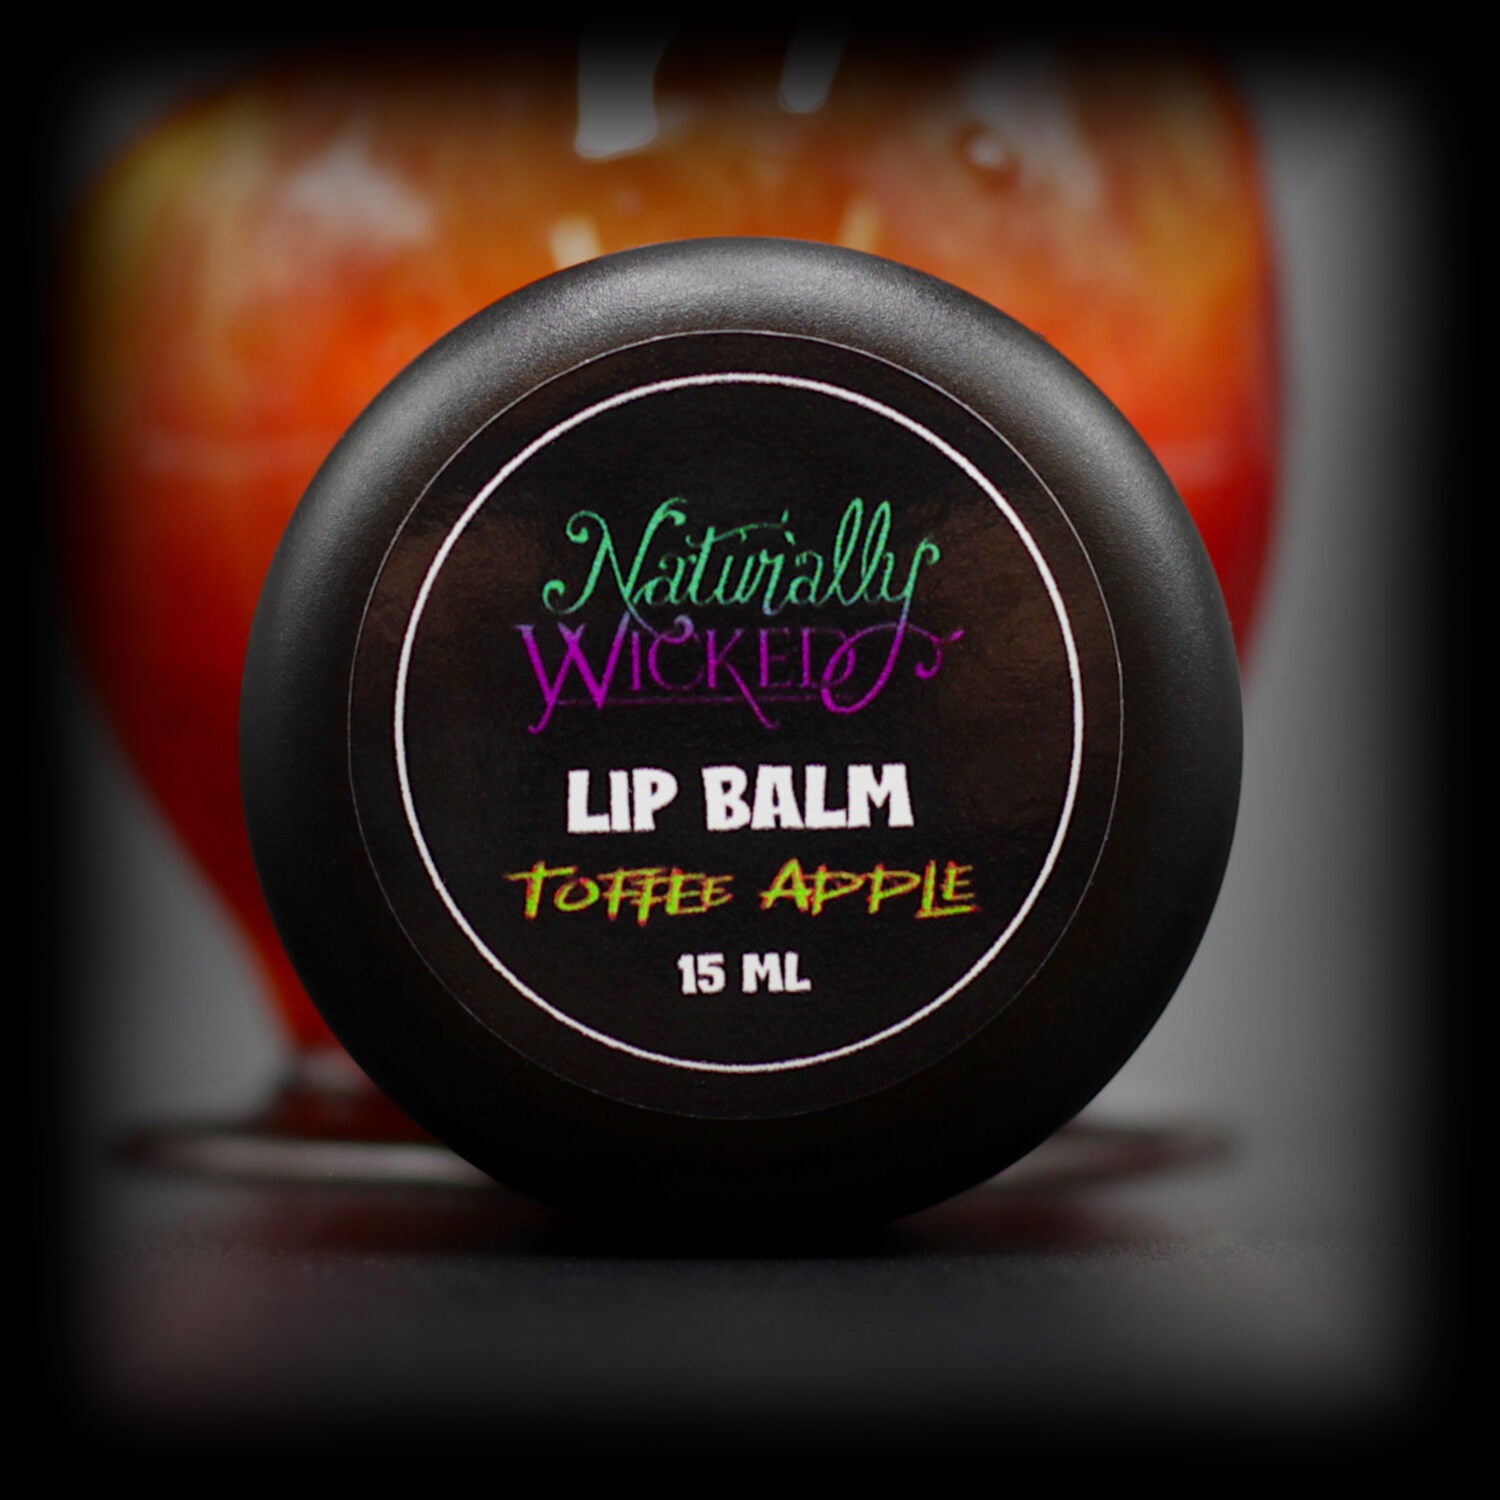 Naturally Wicked Toffee Apple Lip Balm Top Beside Red Toffee Covered Apple